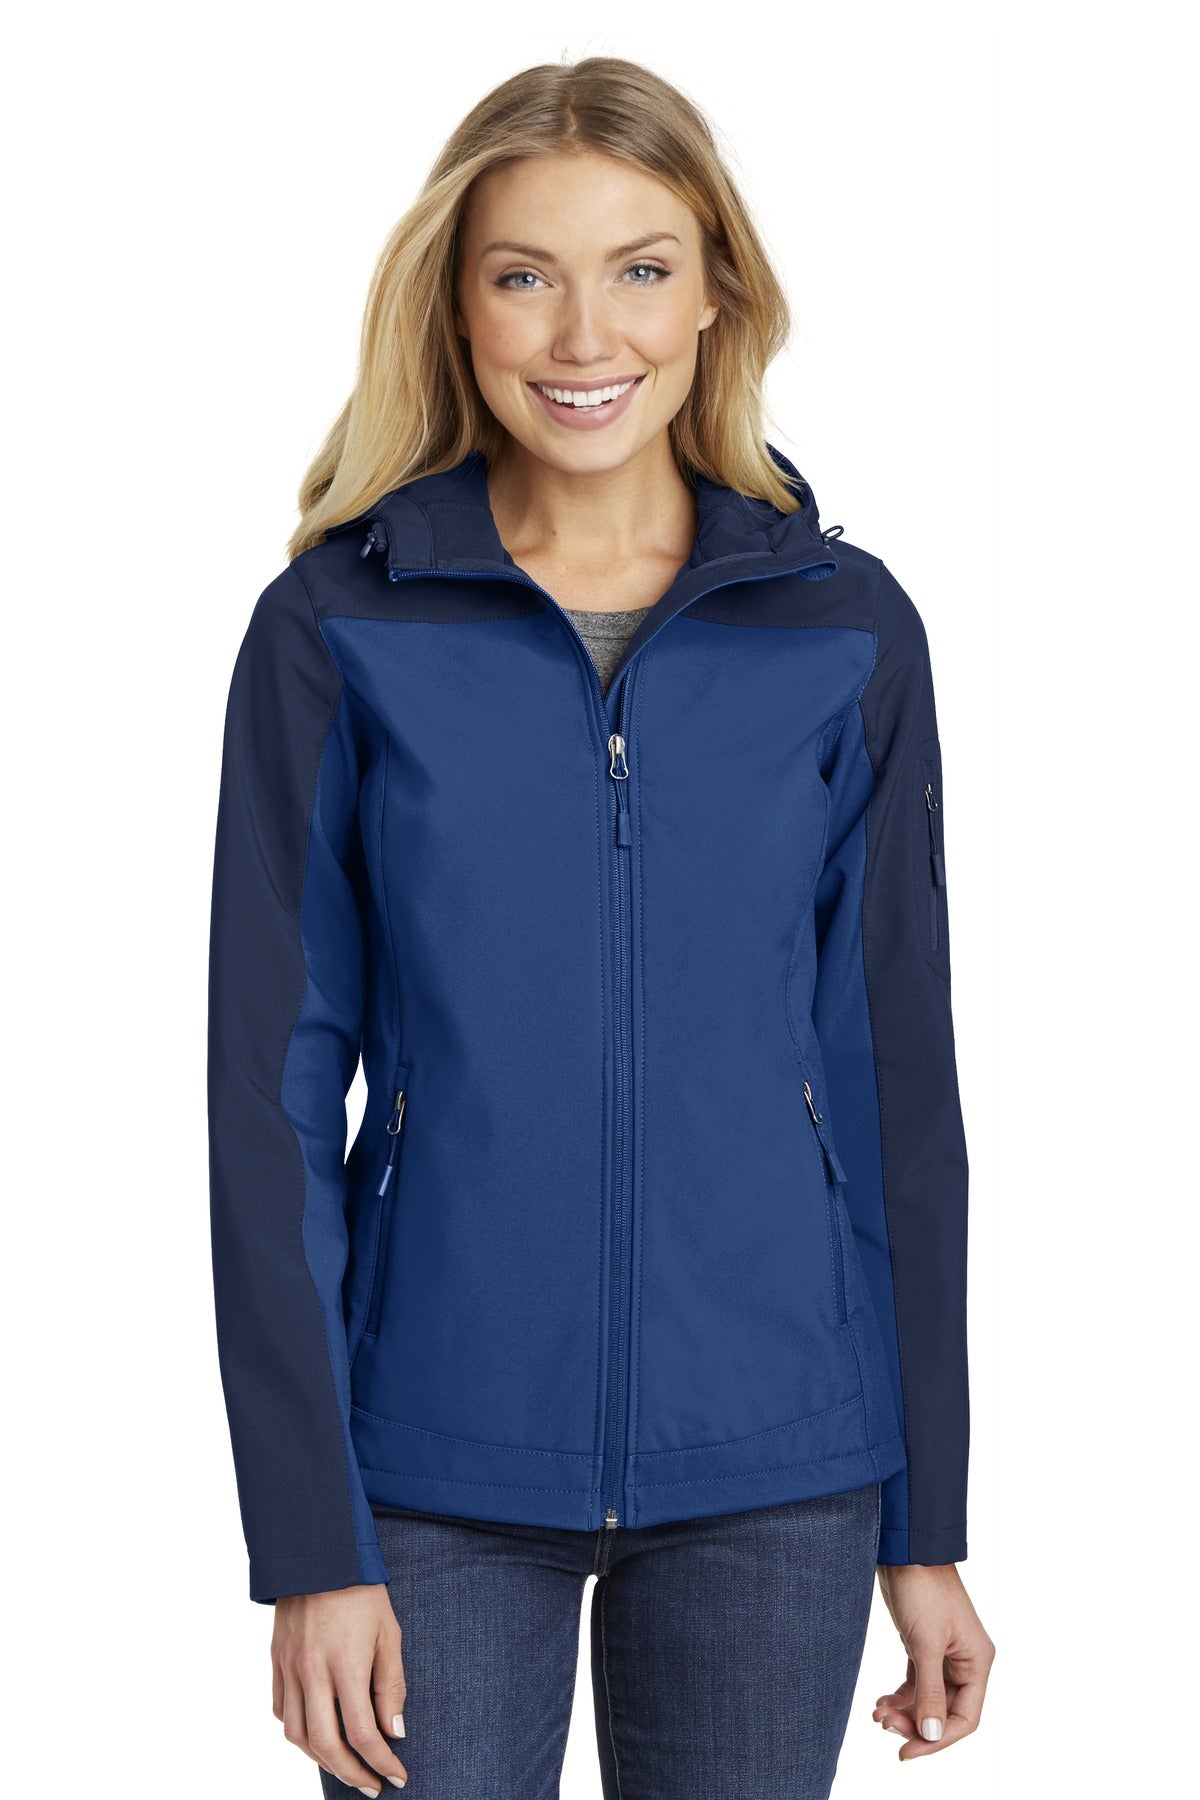 Port Authority® Ladies Hooded Core Soft Shell Jacket. L335 - DFW Impression